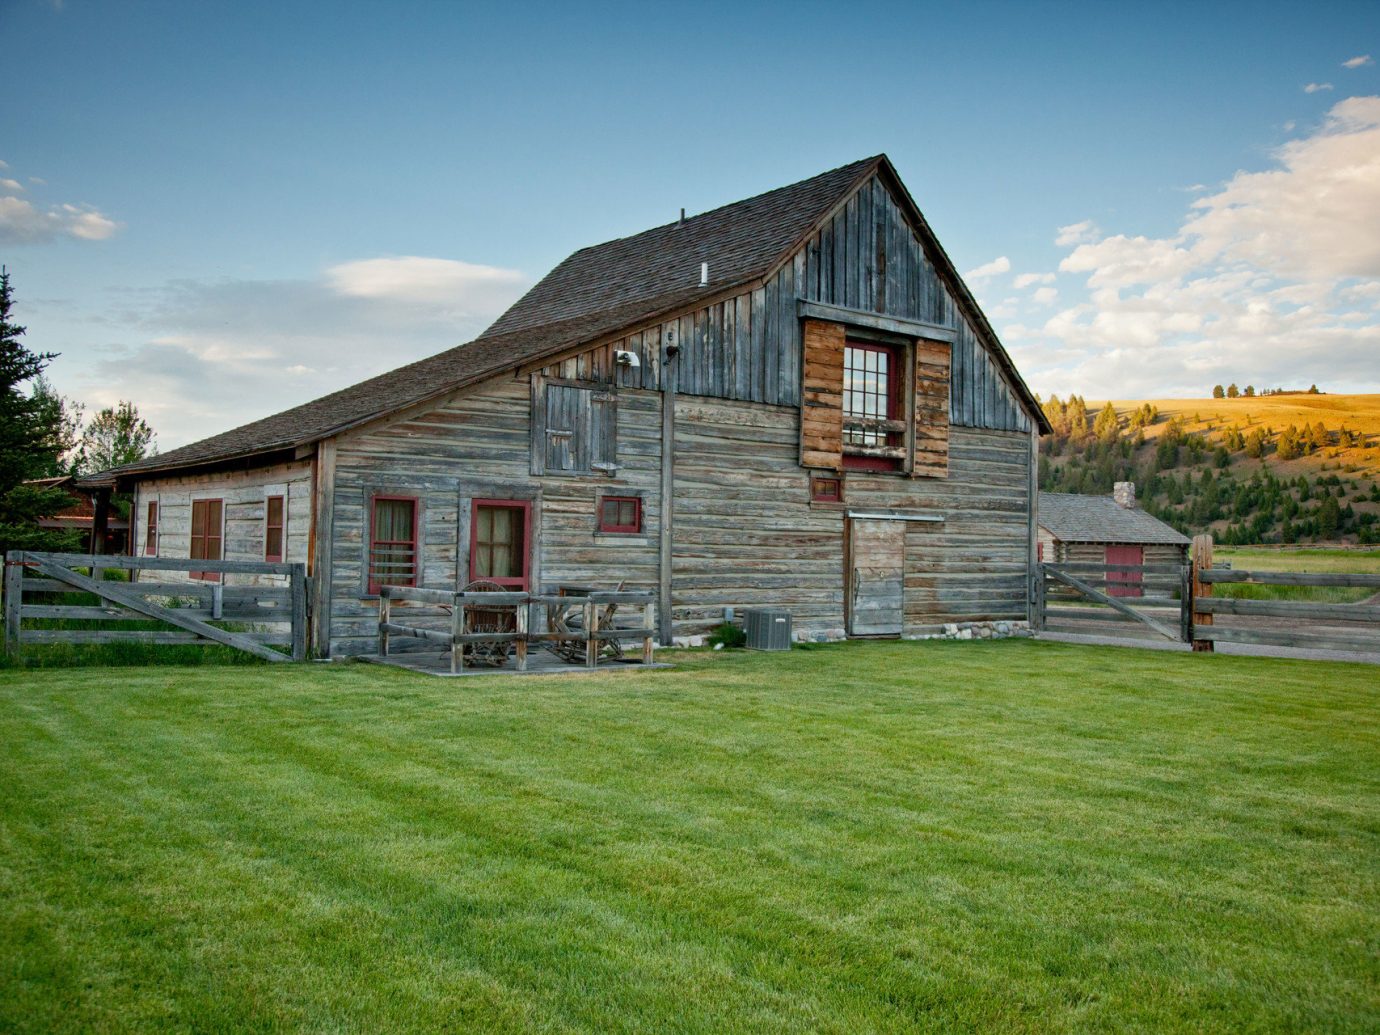 Cabin calm Exterior grass Greenery isolation log cabin Mountains Nature Outdoors remote Rustic serene trees Trip Ideas sky outdoor building house property home estate field residential area lawn barn real estate Farm farmhouse rural area cottage facade grassy siding backyard farm building lush